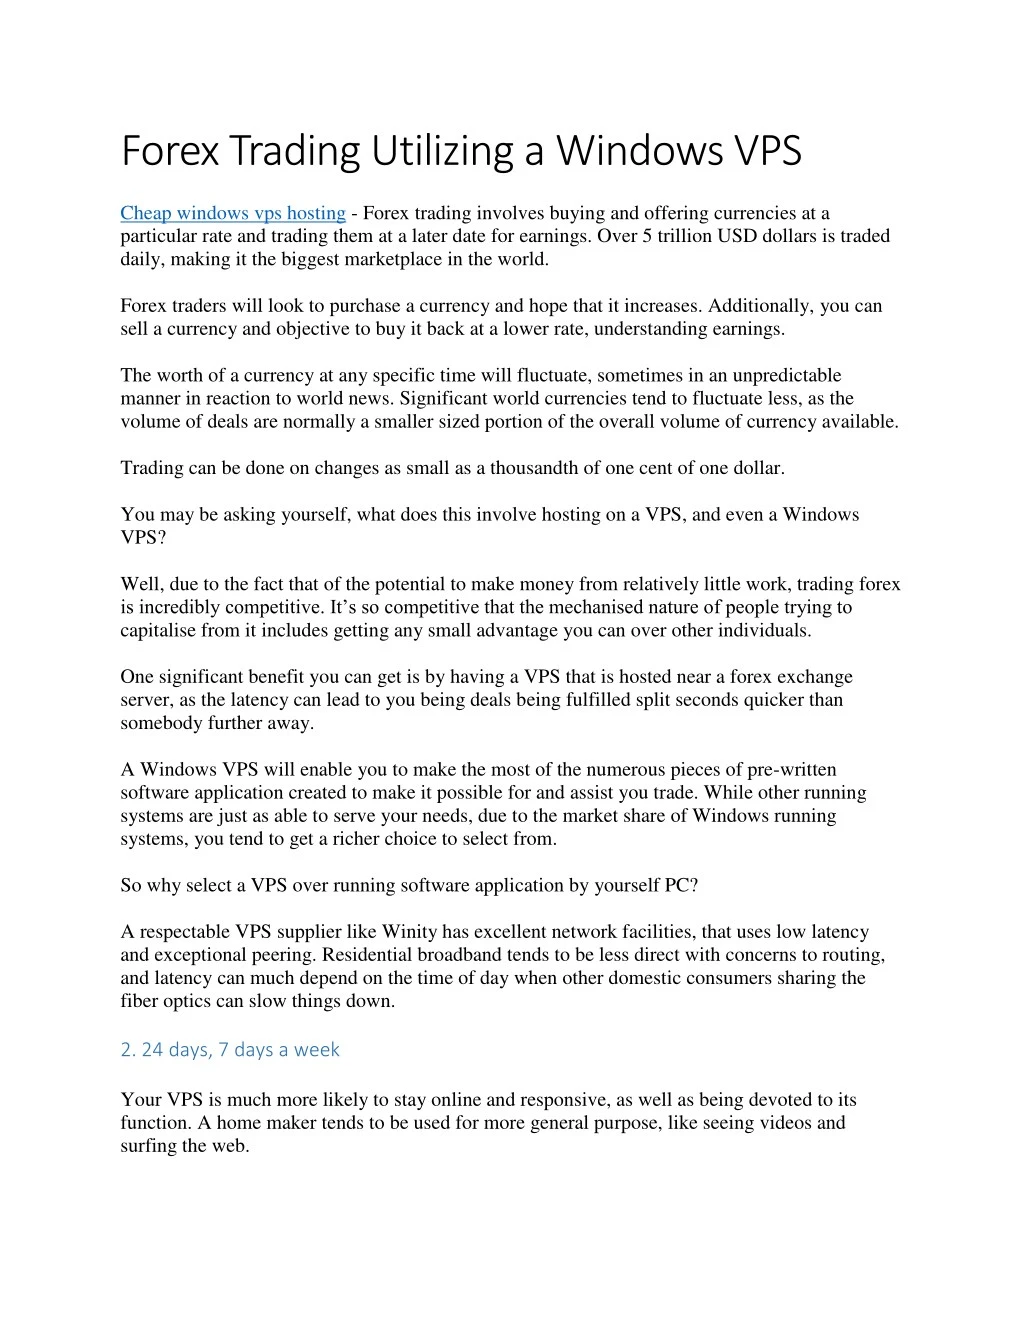 forex trading utilizing a windows vps